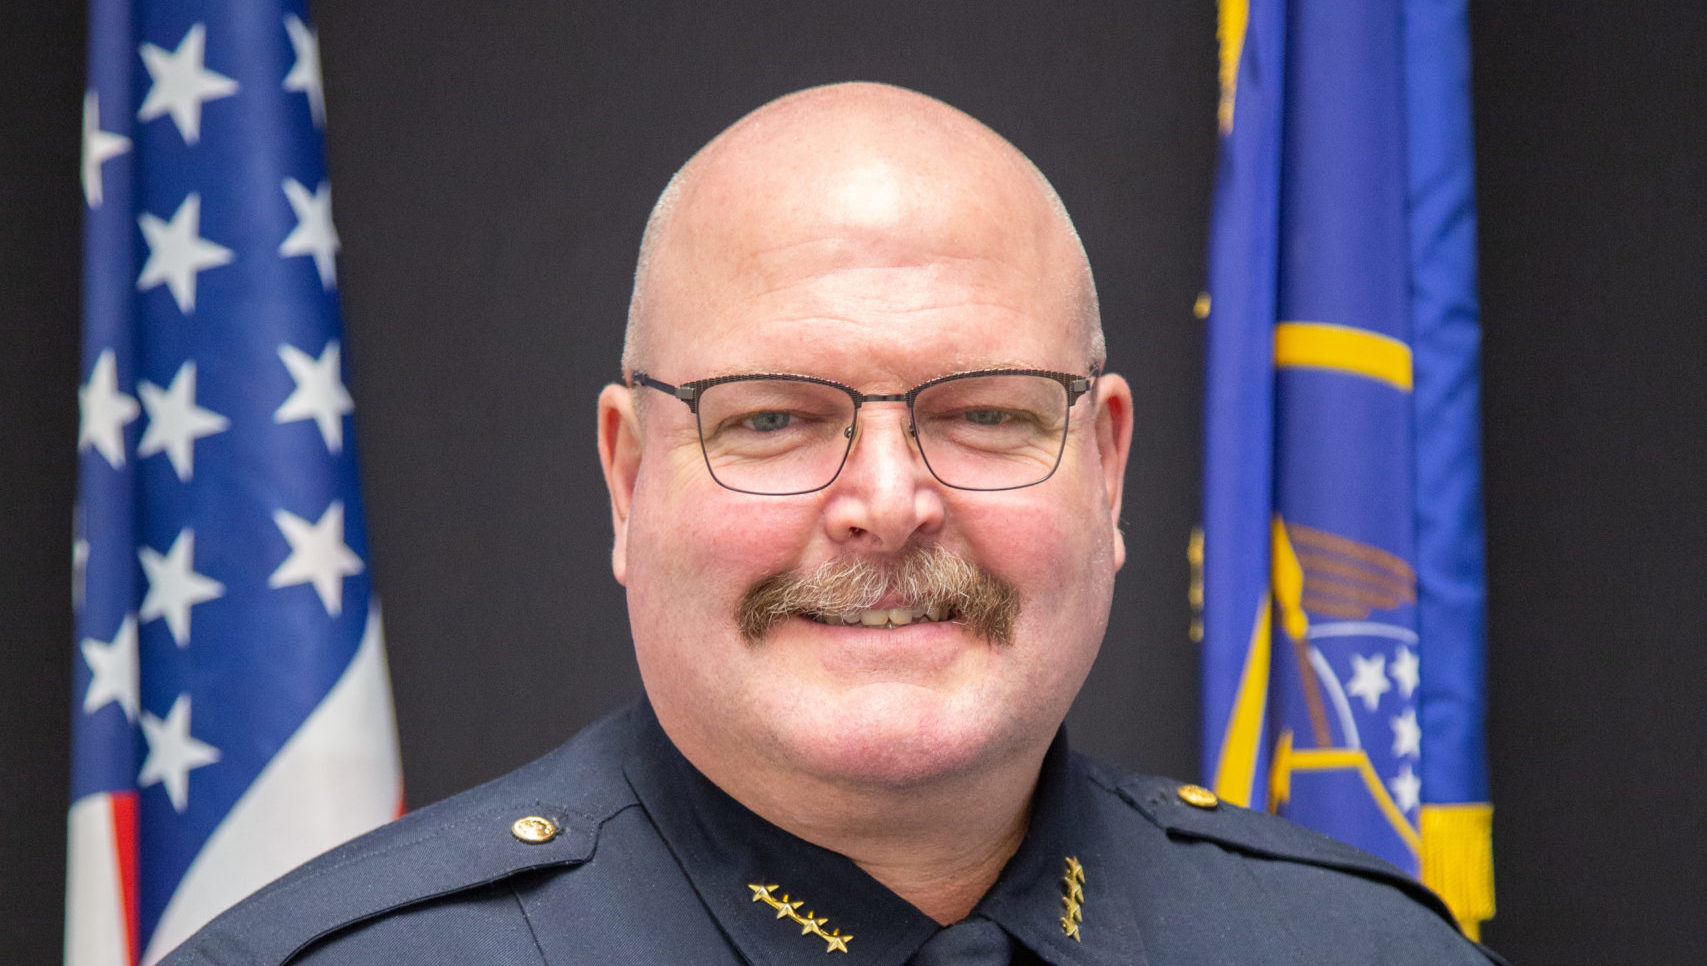 Troy Beebe has been named as the new Chief of Police for Provo City....